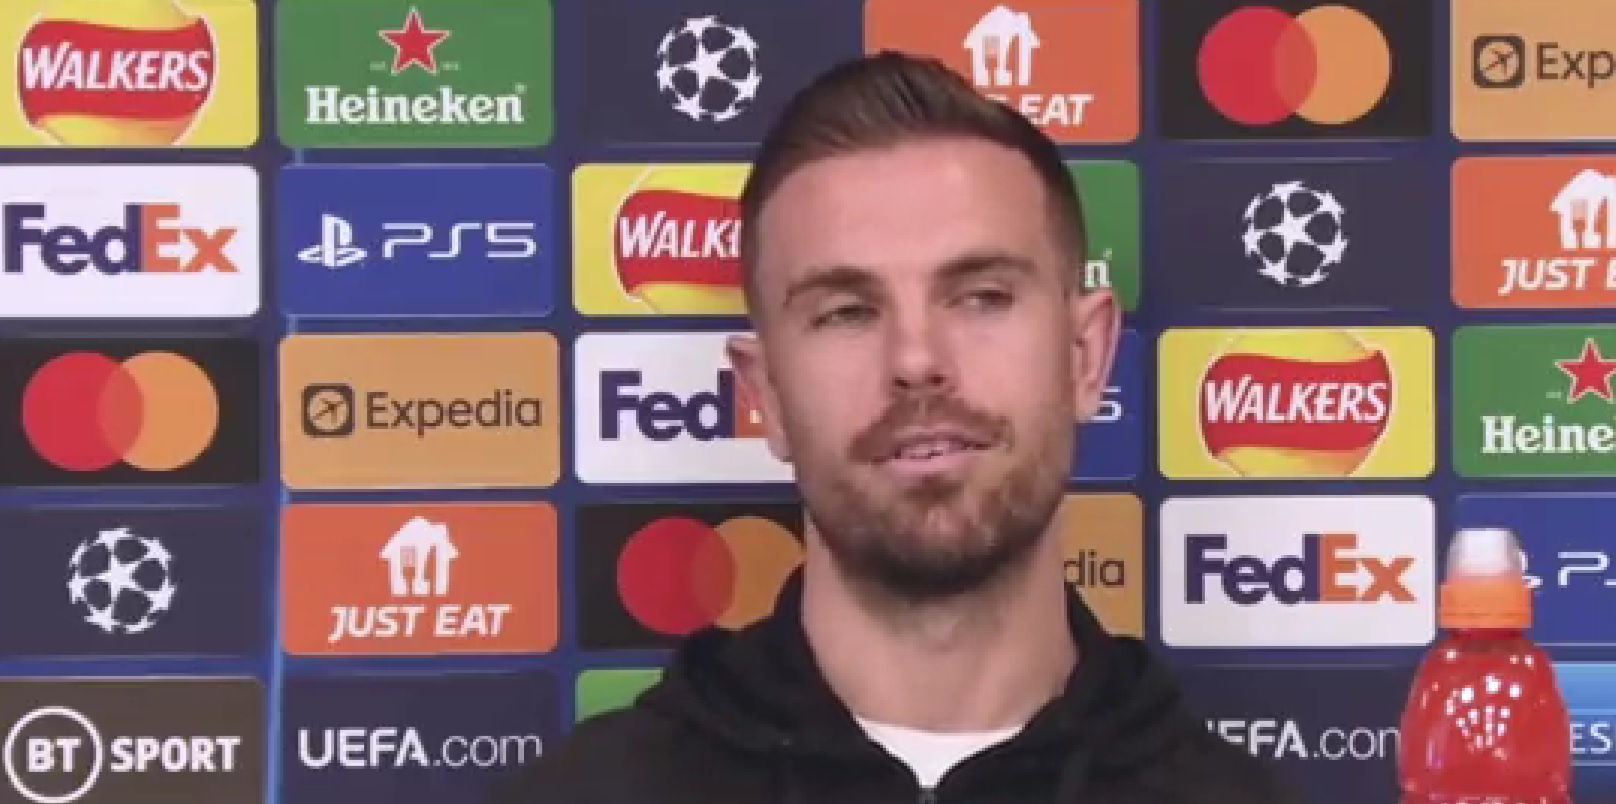 (Video) Henderson revisits Klopp’s superb reaction to Europa League final defeat to Emery’s Sevilla that paved the way for future success